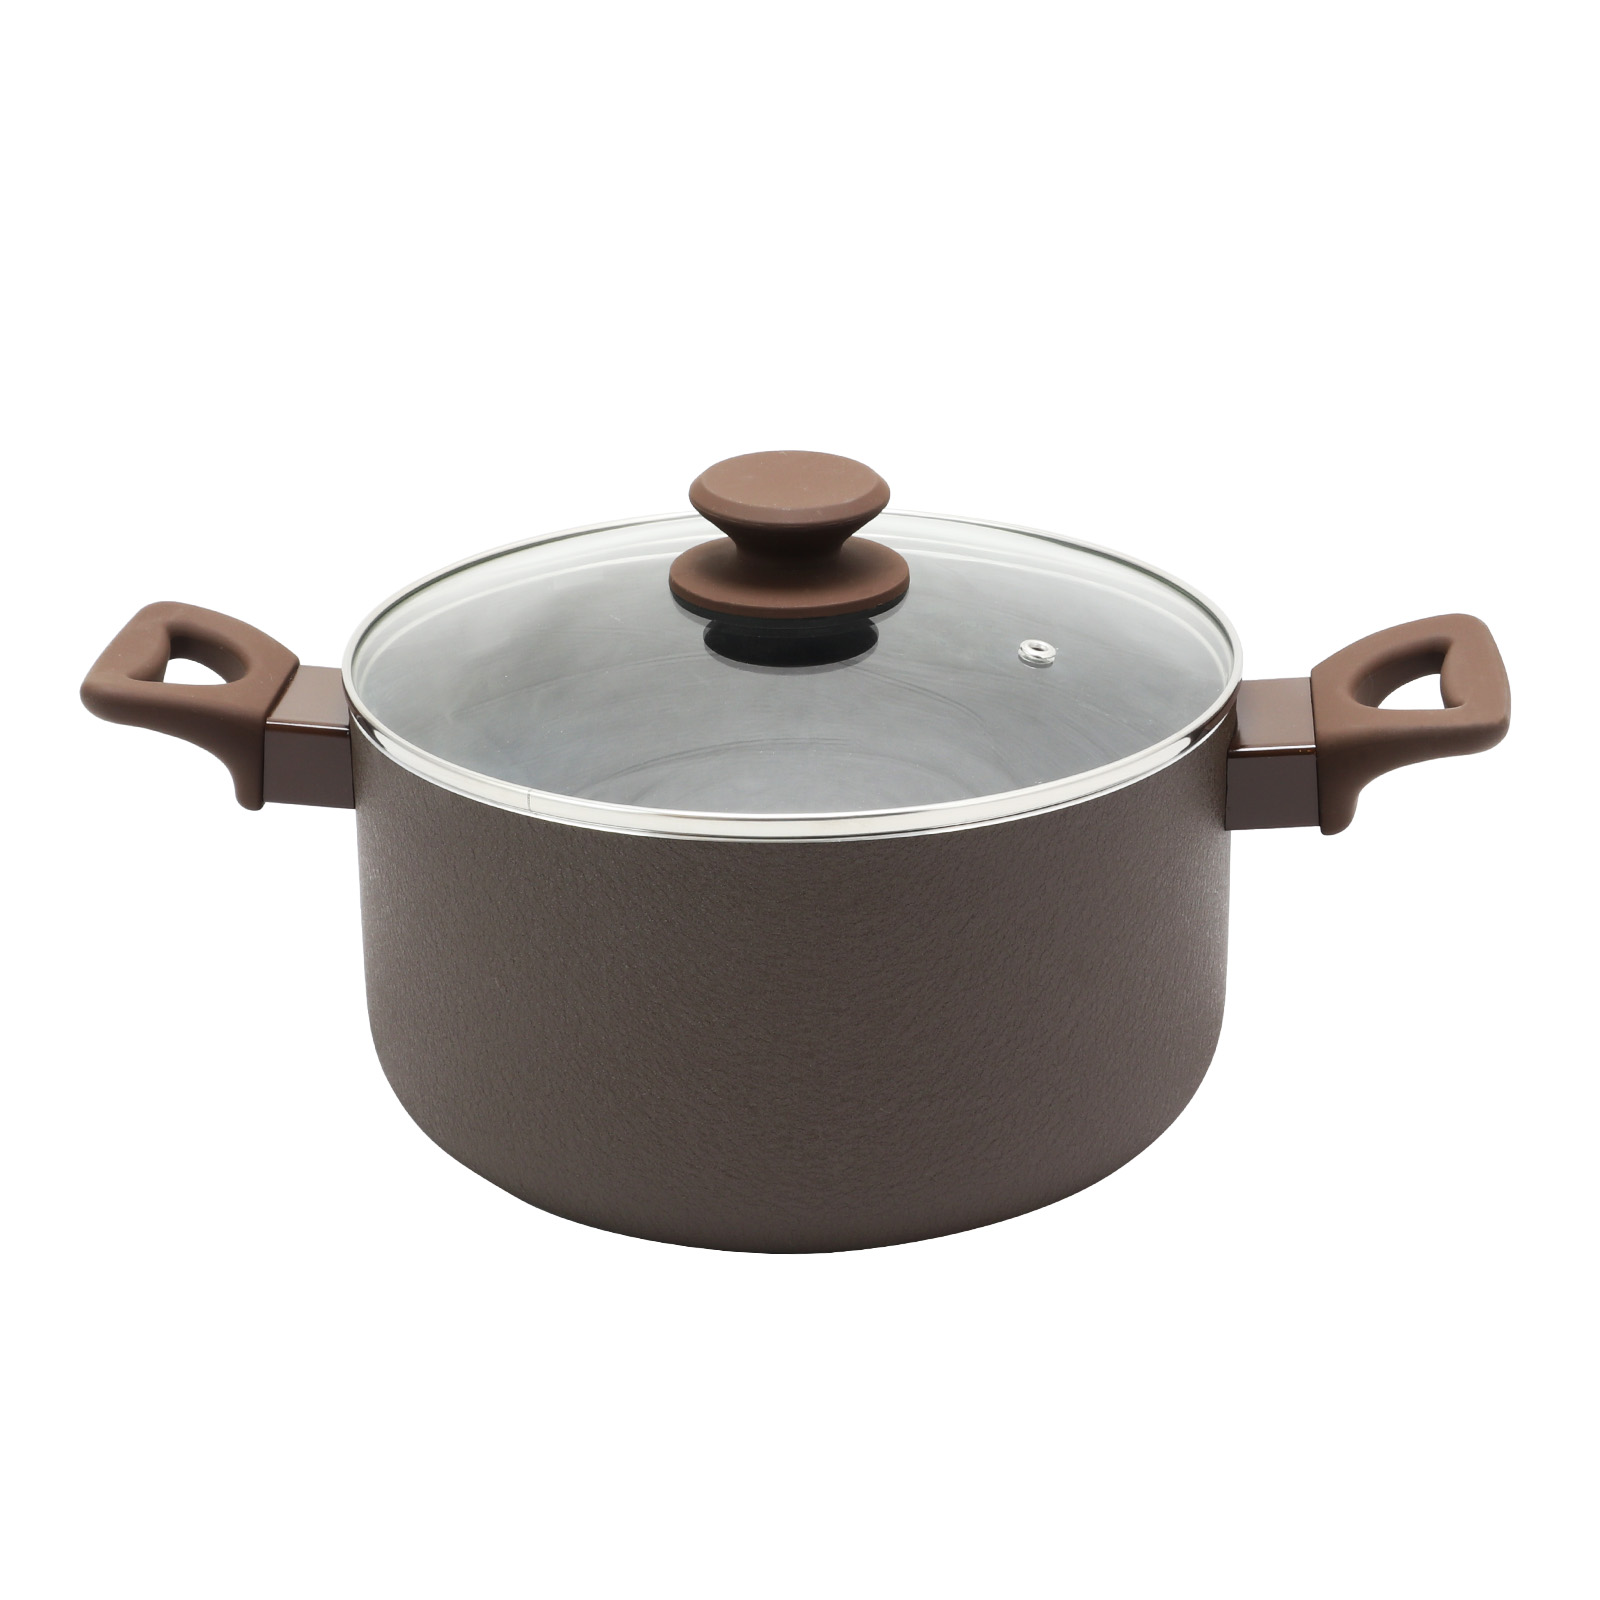 Oster Ashford 6 Quart Aluminum Dutch Oven with Lid in Brown